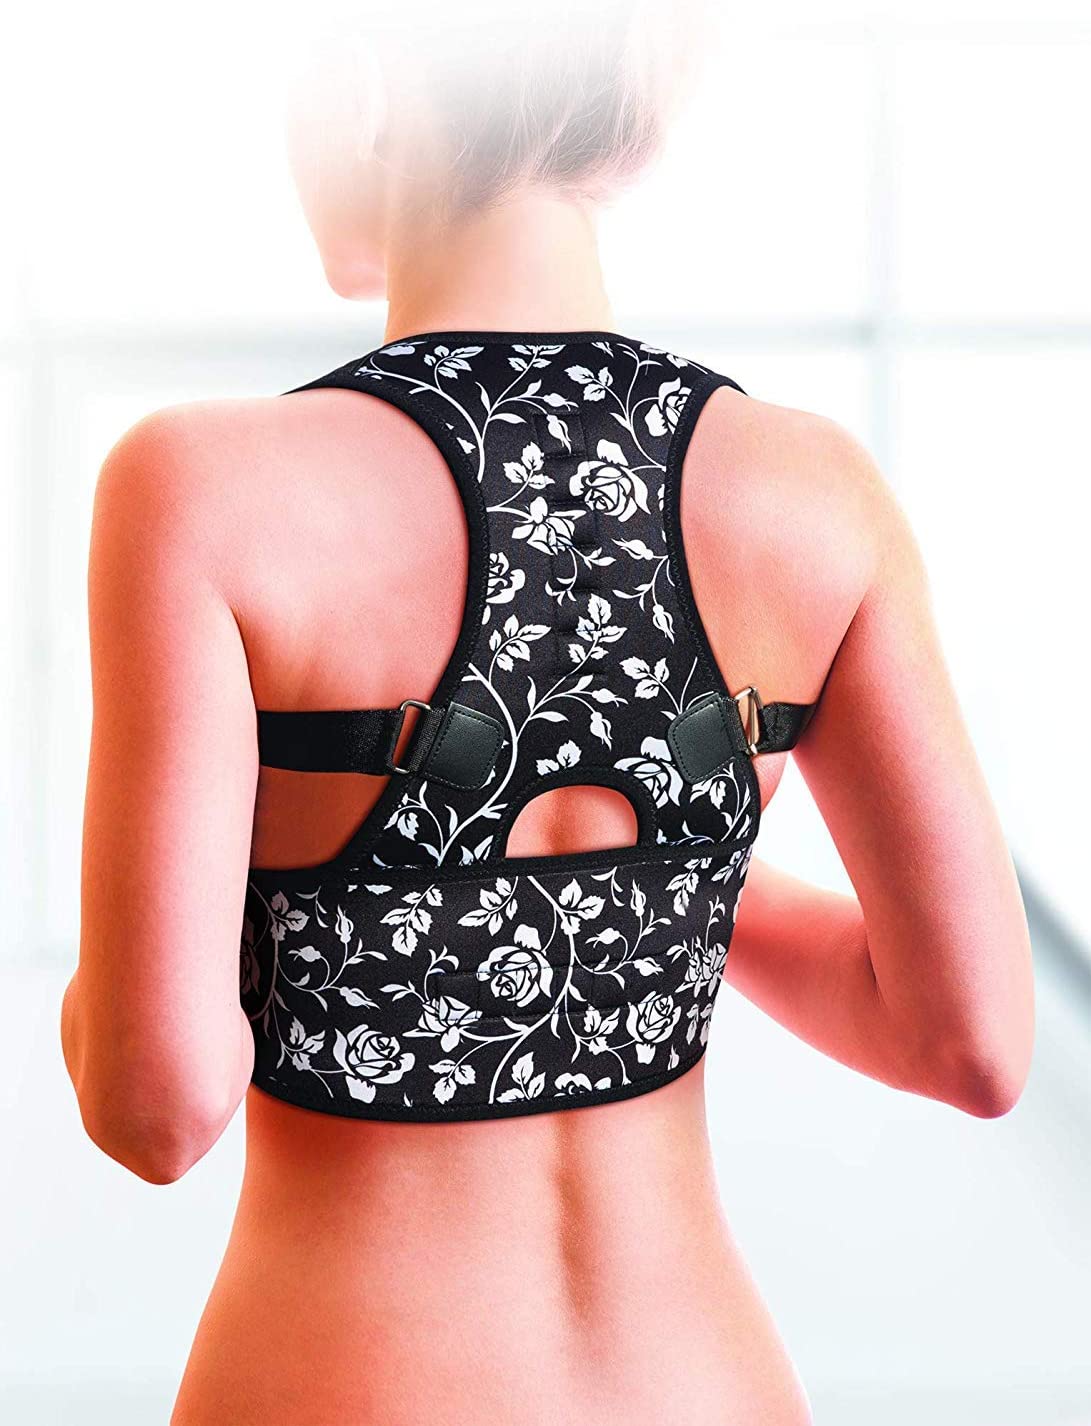 Designed to keep shoulders back and limit clavicle movement during treatment of clavicular fractures.